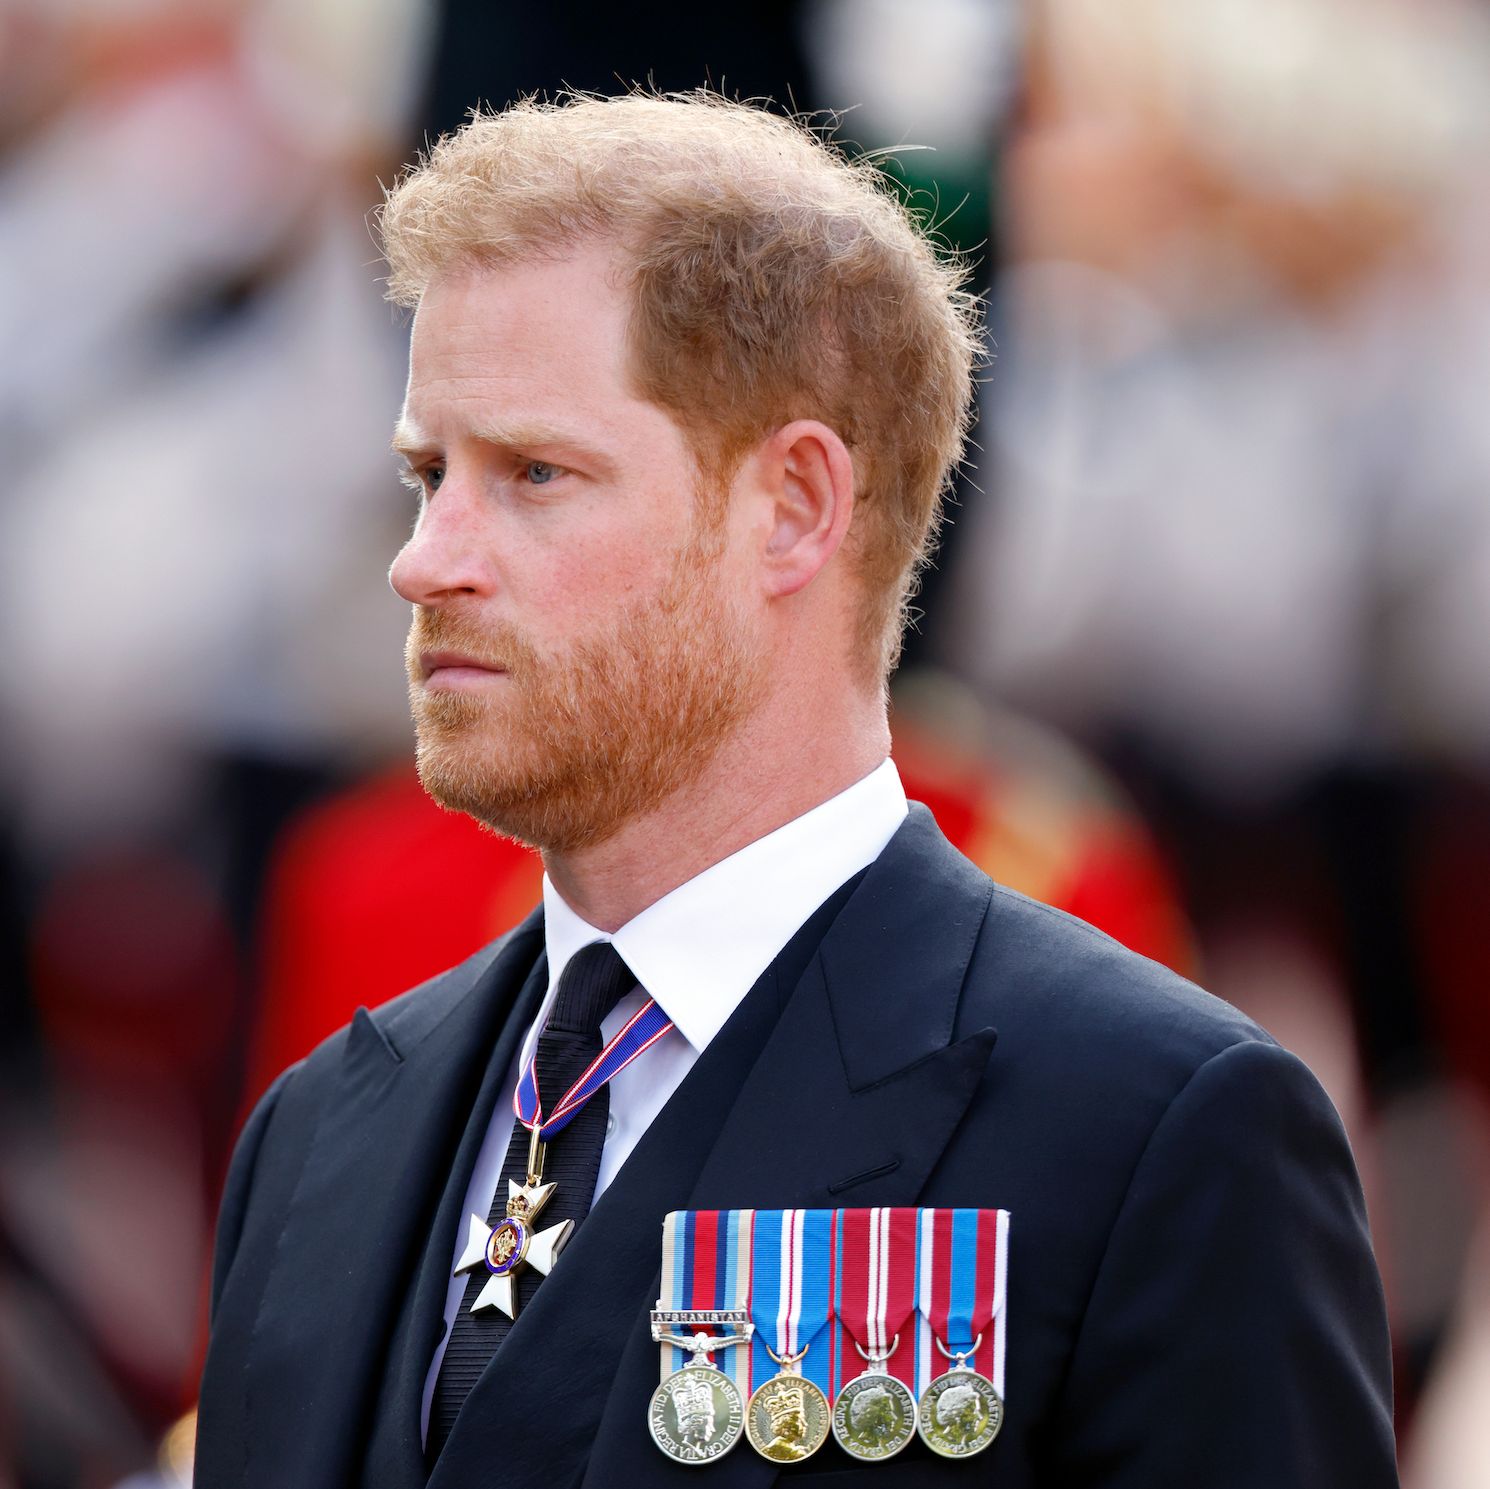 Prince Harry Heartbreakingly Recounts Driving Through the Tunnel Where Princess Diana Died